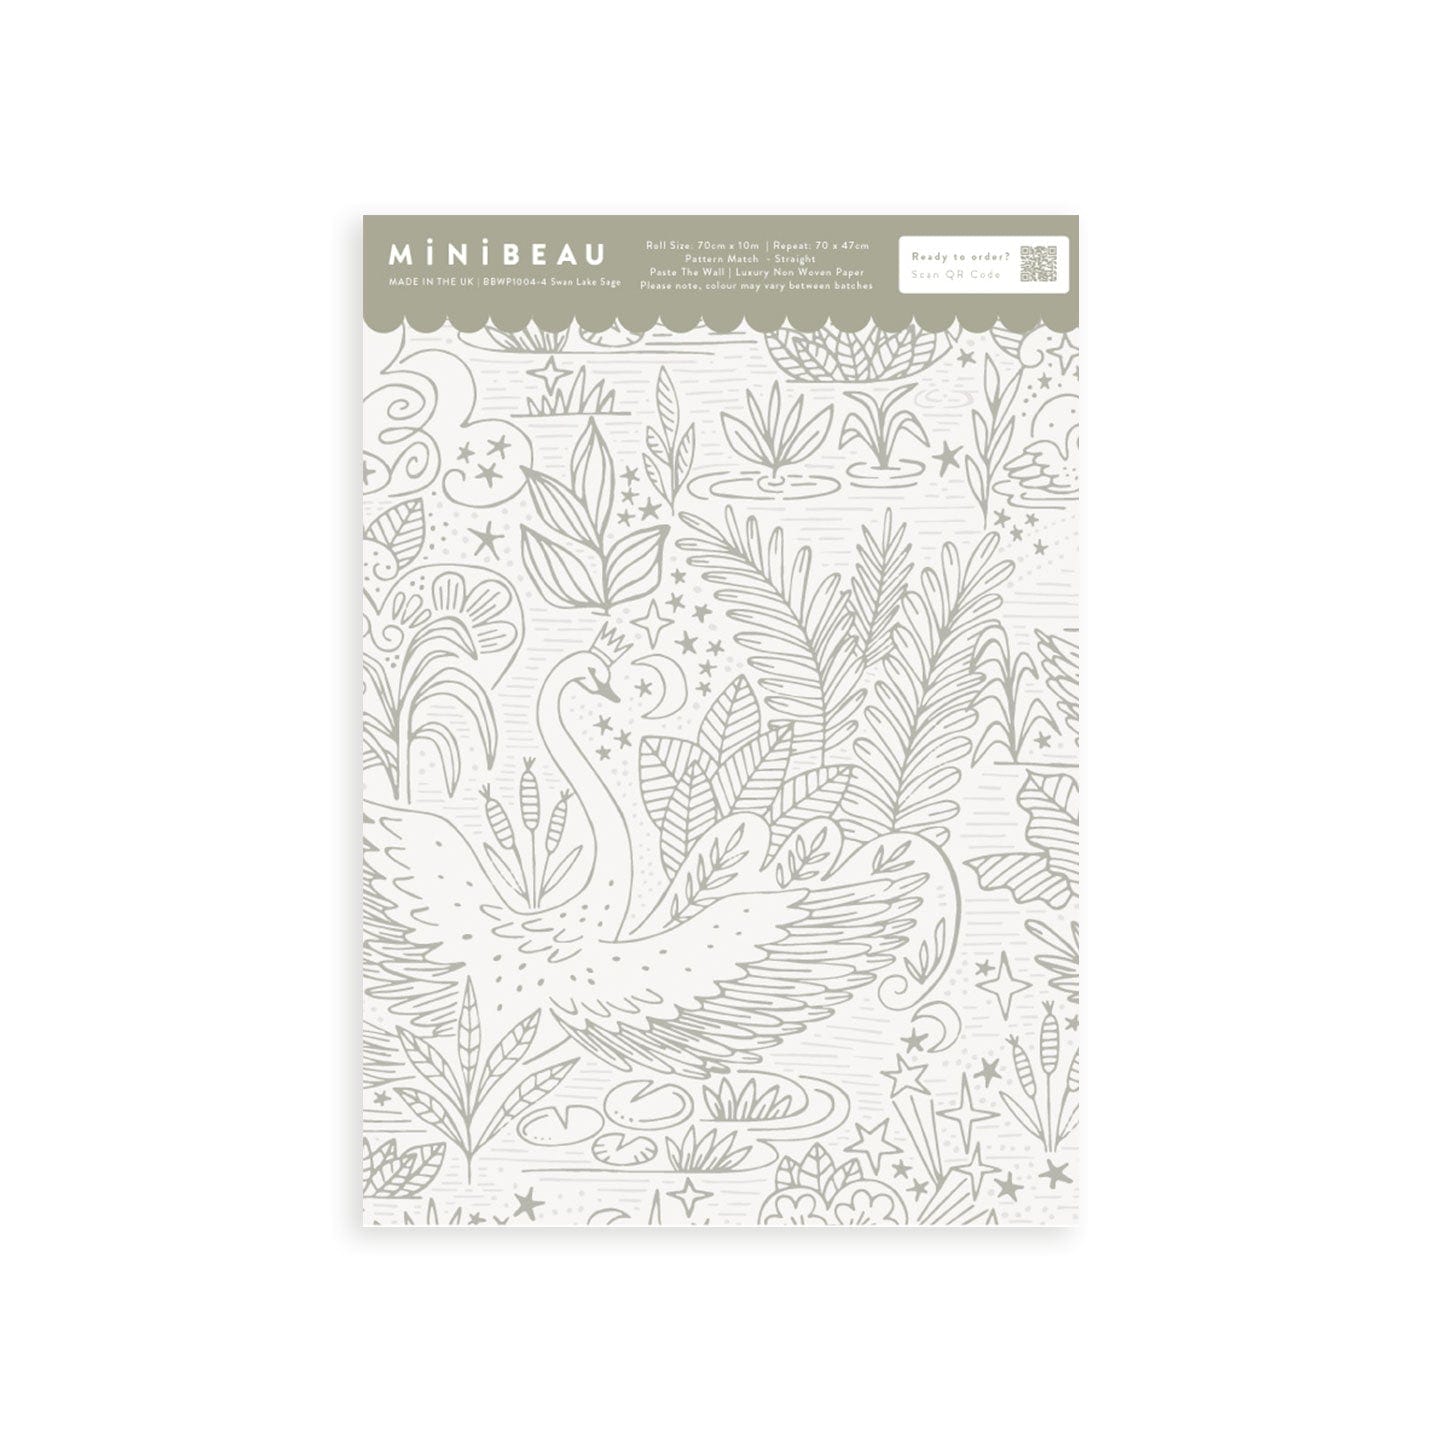 Wallpaper sample of very detailed floral print with swans gliding across a lake, flowers and leaves surround them. The print is line work and is all in sage green